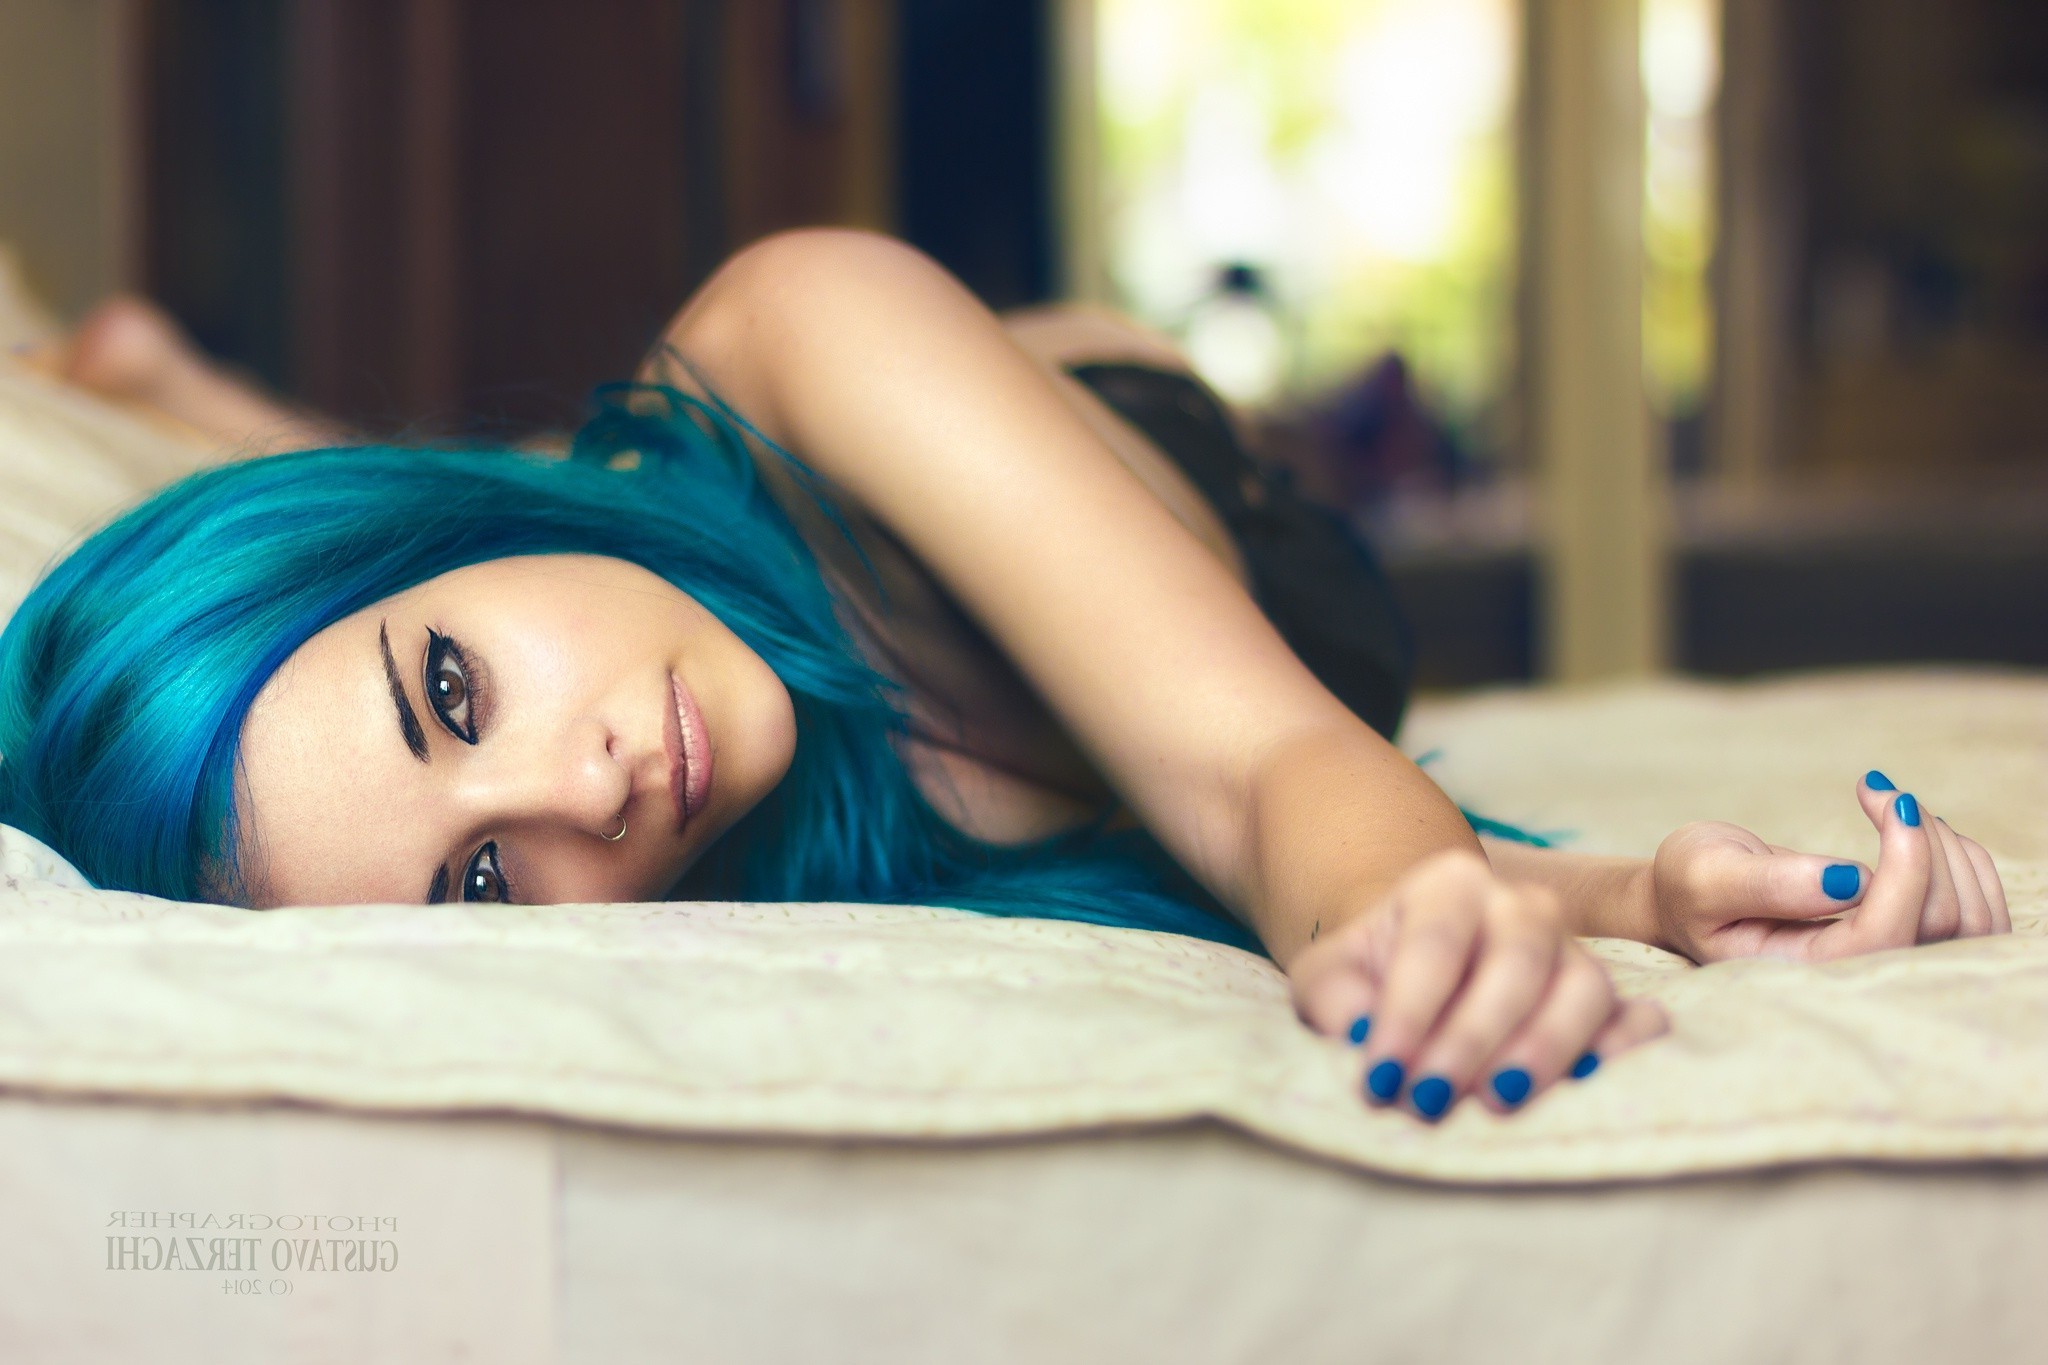 Gustavo Terzaghi, Model, Women, Long Hair, Dyed Hair, Looking At Viewer, Straight Hair, Face, In Bed, Women Indoors, Depth Of Field, Brown Eyes Wallpaper